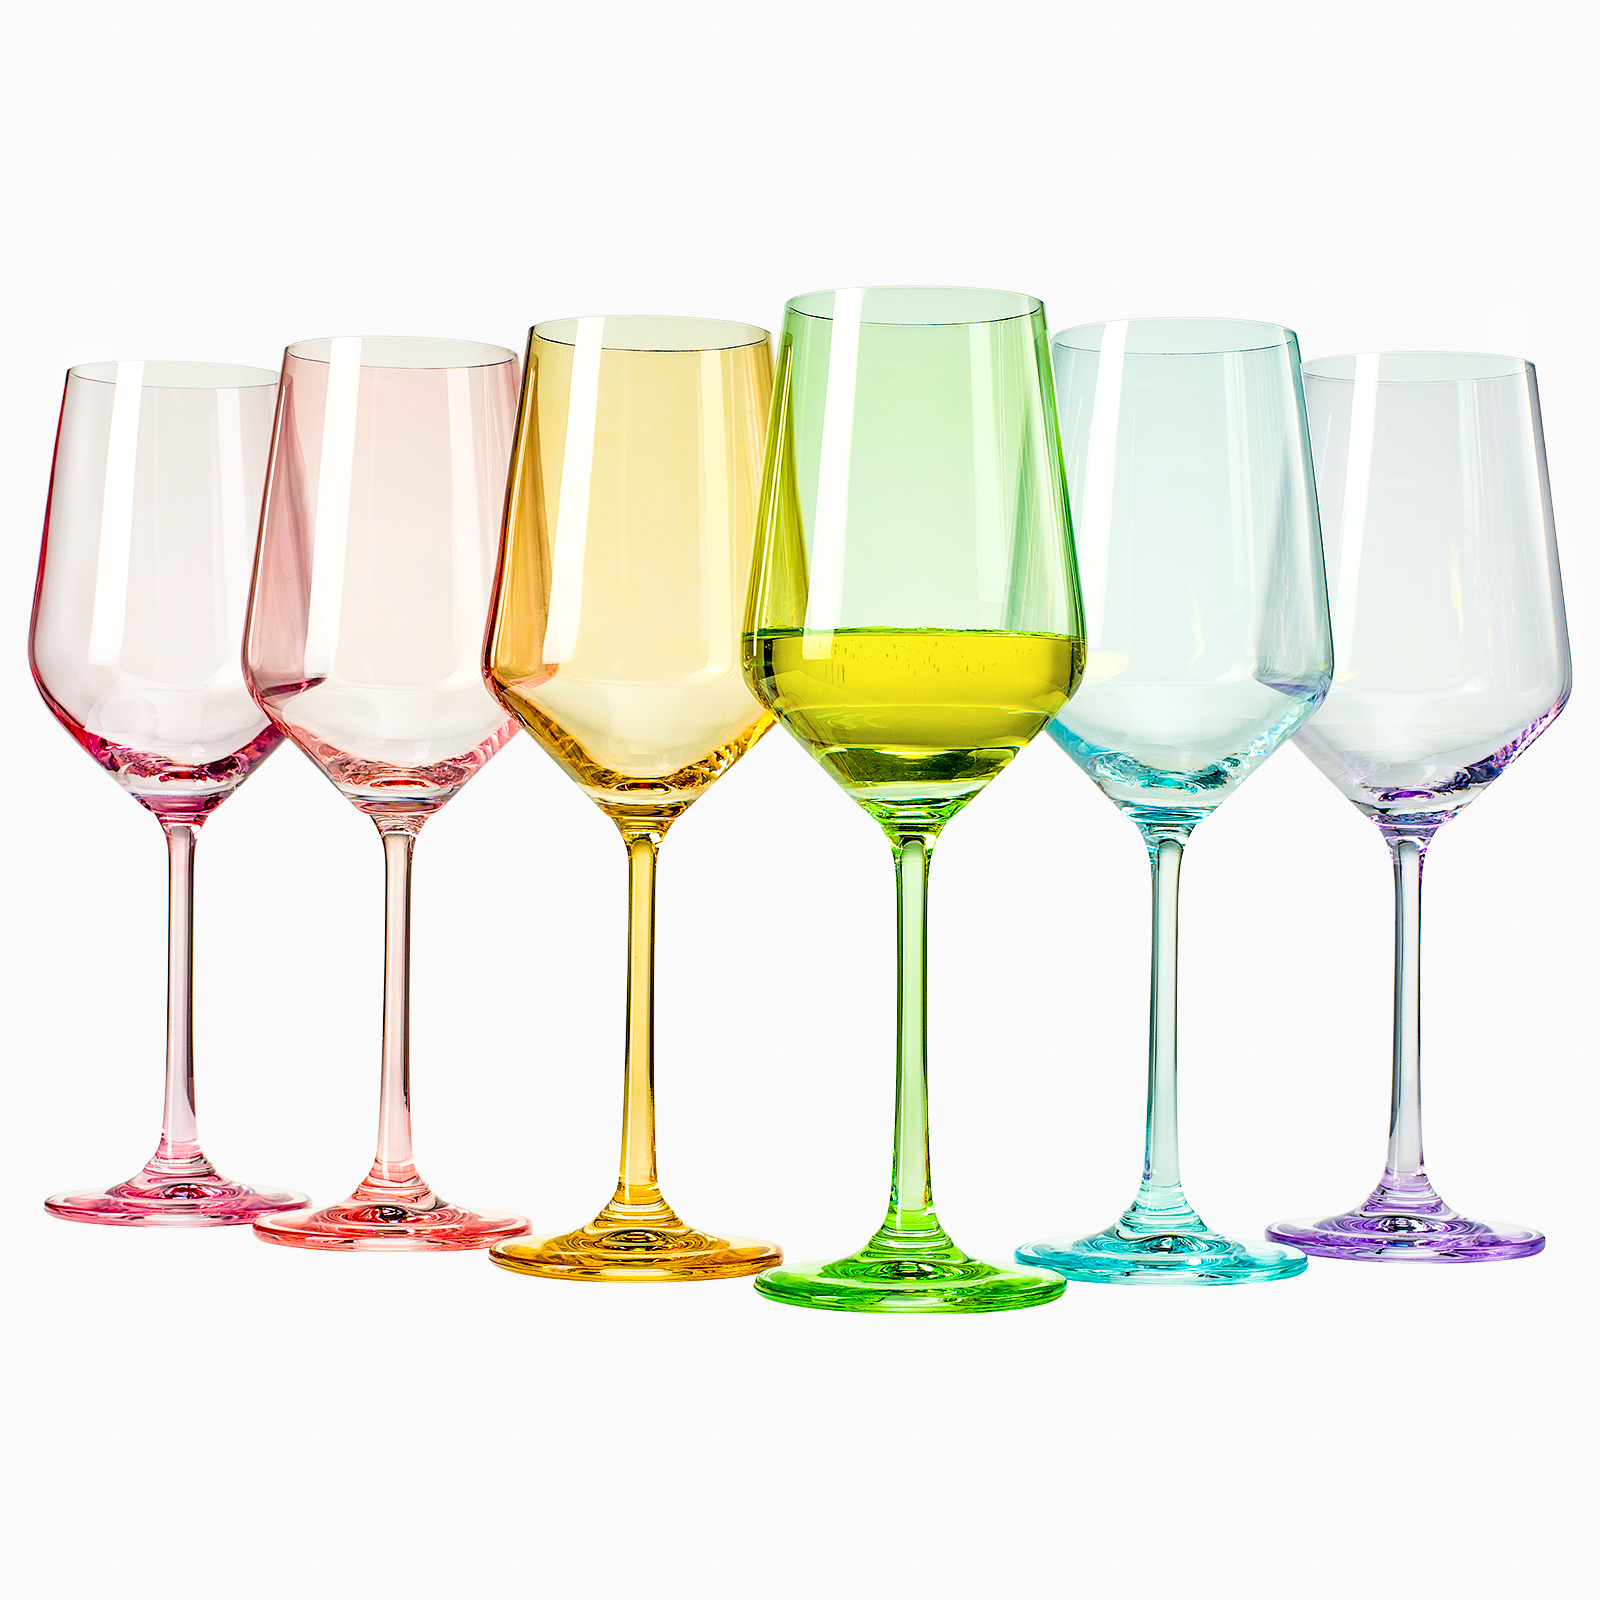 TableTop King Colored Wine Glasses Set of 6 - Colorful Stem Wine Glasses 10  Oz - Red Nuance Accent C…See more TableTop King Colored Wine Glasses Set